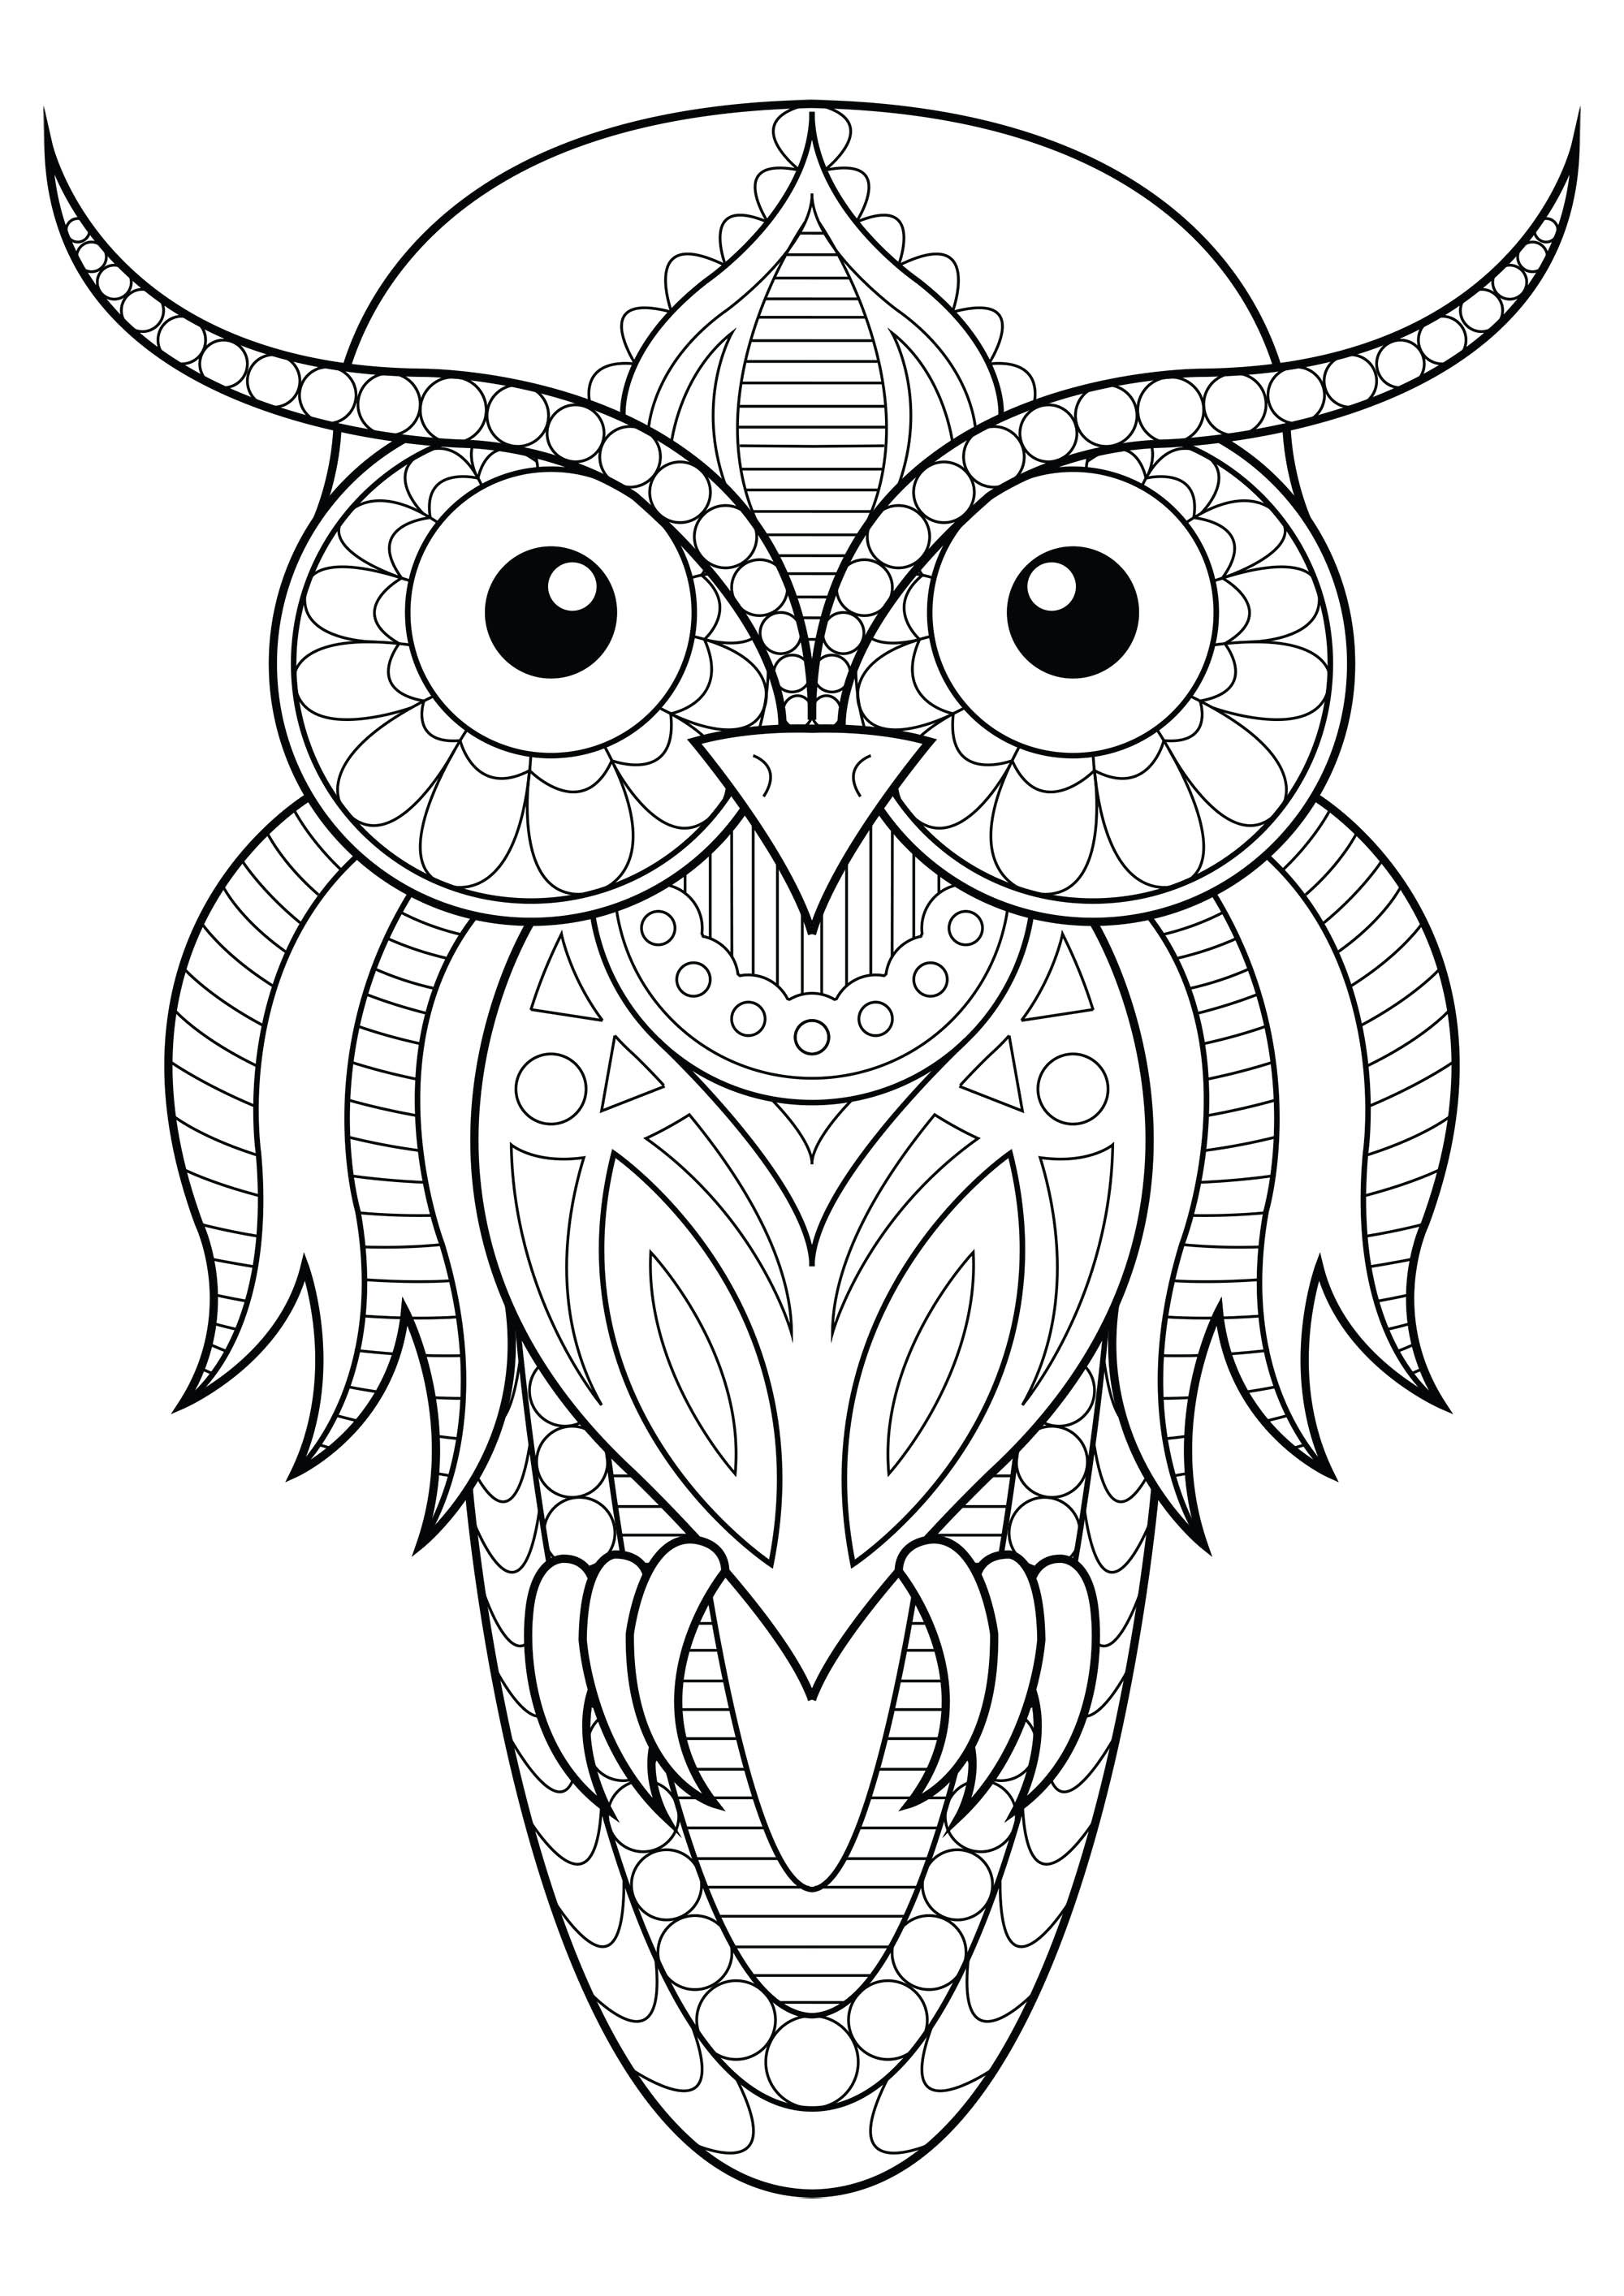 Animal Owl Coloring Pages For Adults / More and more people of all ages ...